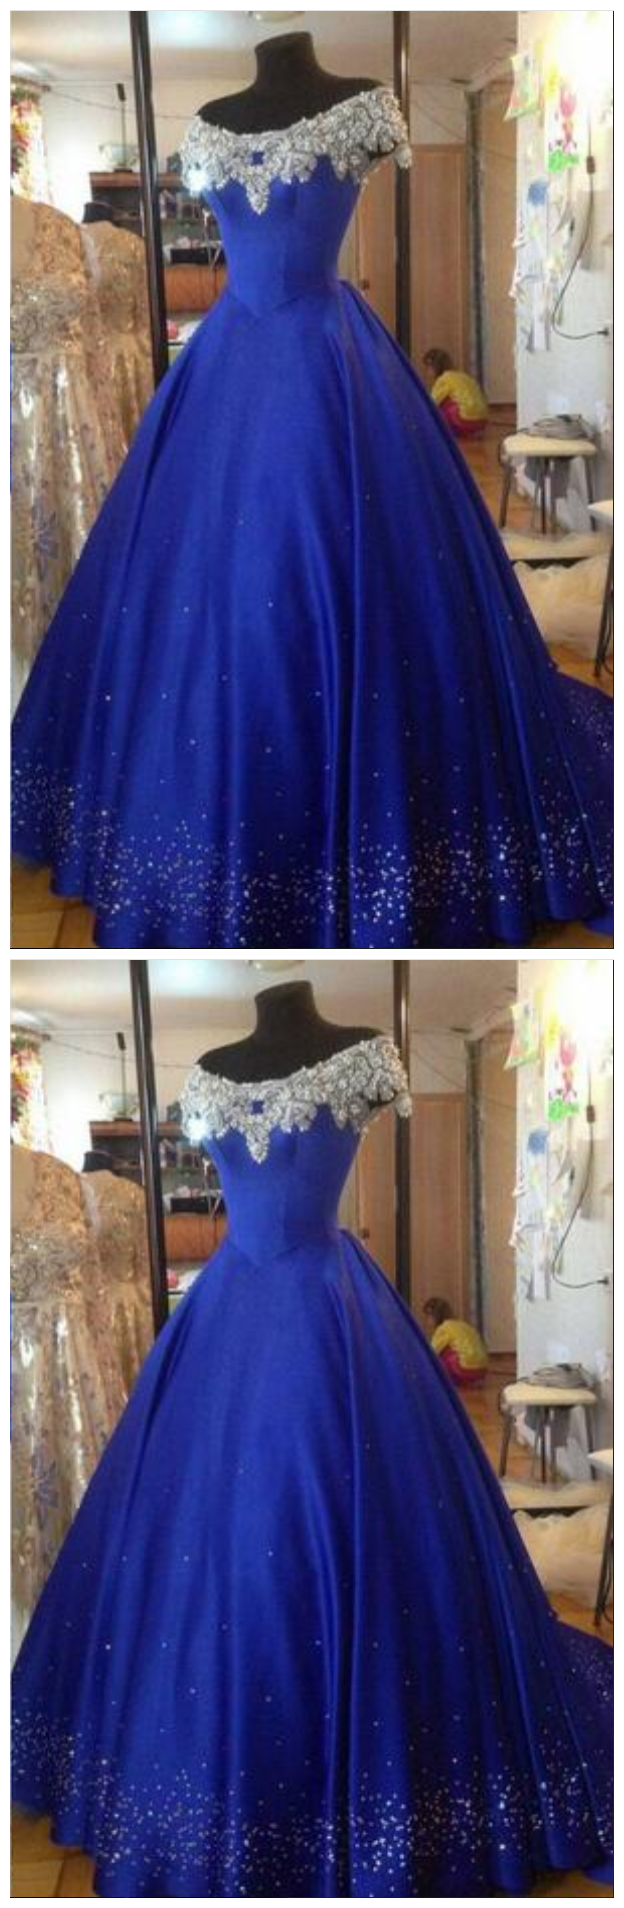 Cinderella Ball Gown Quinceanera Dresses Debutante Crystal Puffy 2017 Prom Gowns Royal Blue Beads Masquerade Pageant Dress